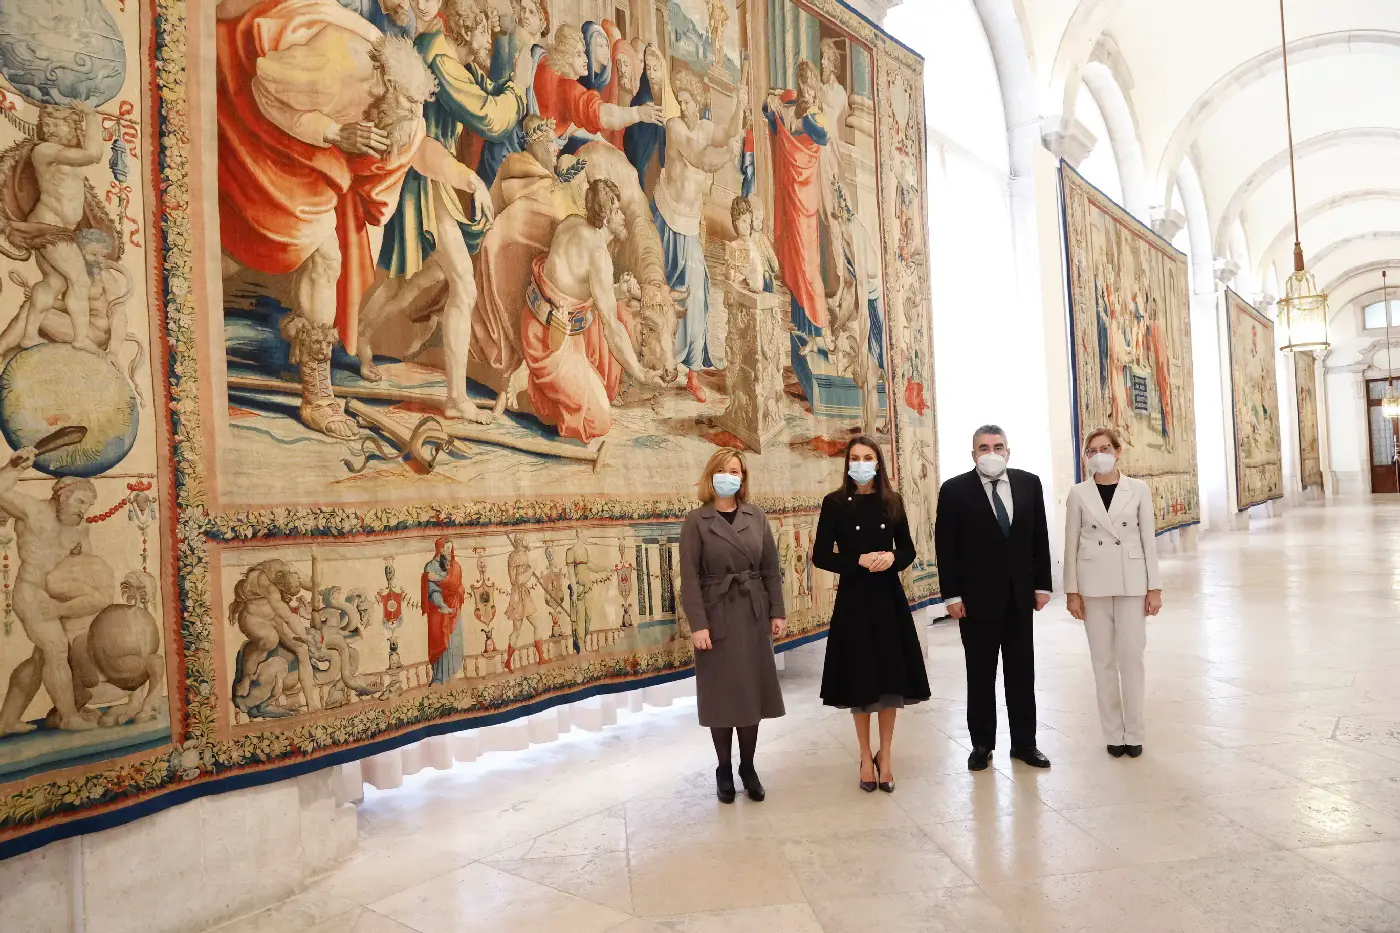 Queen Letizia of Spain chose black Carolina Herrera coat with grey dress for the inauguration of Rafael in Palace exhibition in Madrid